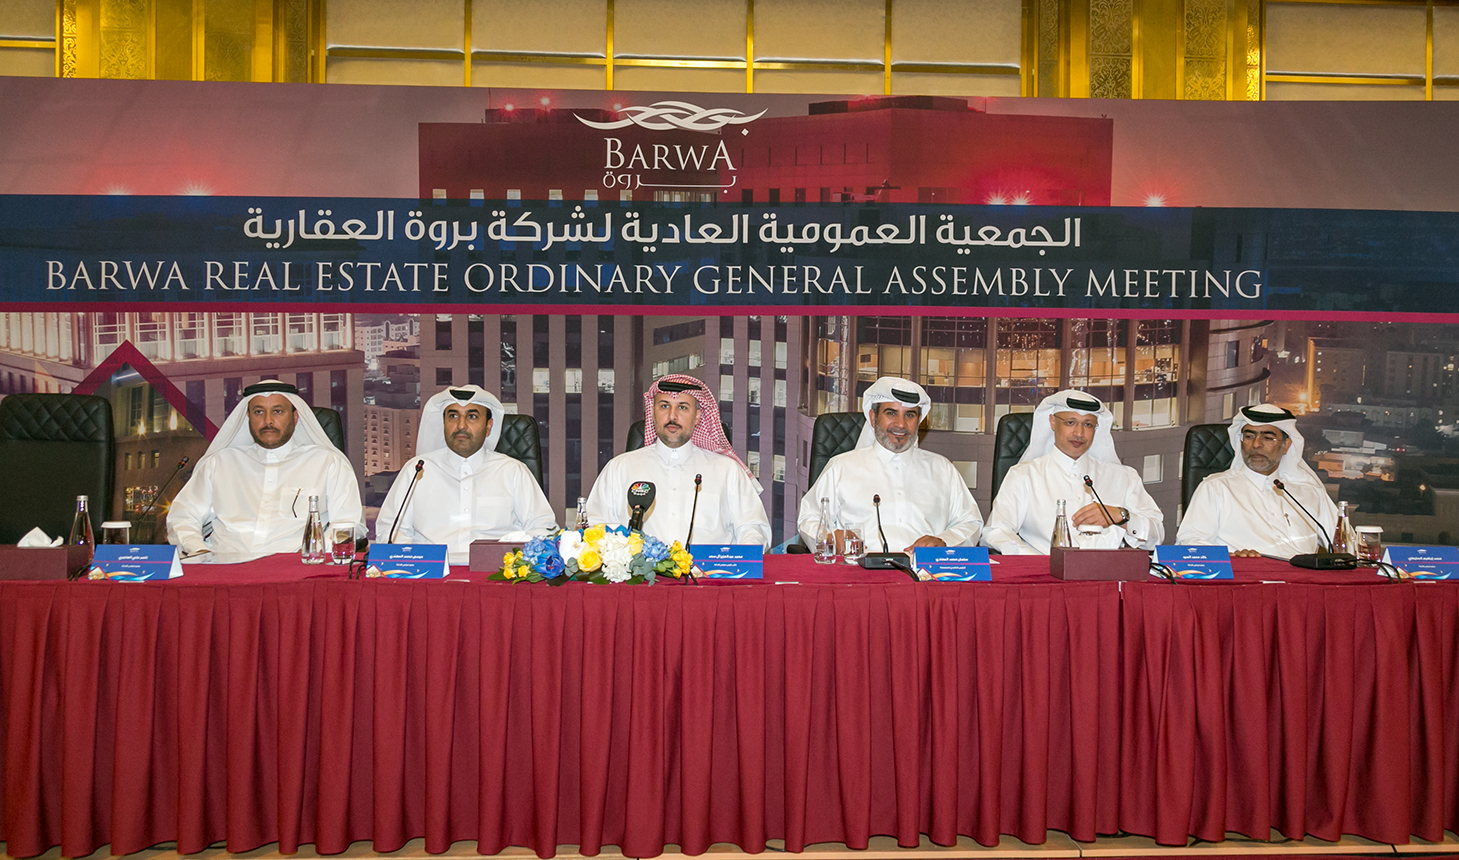 Barwa  AGM approves  all items on the agenda  